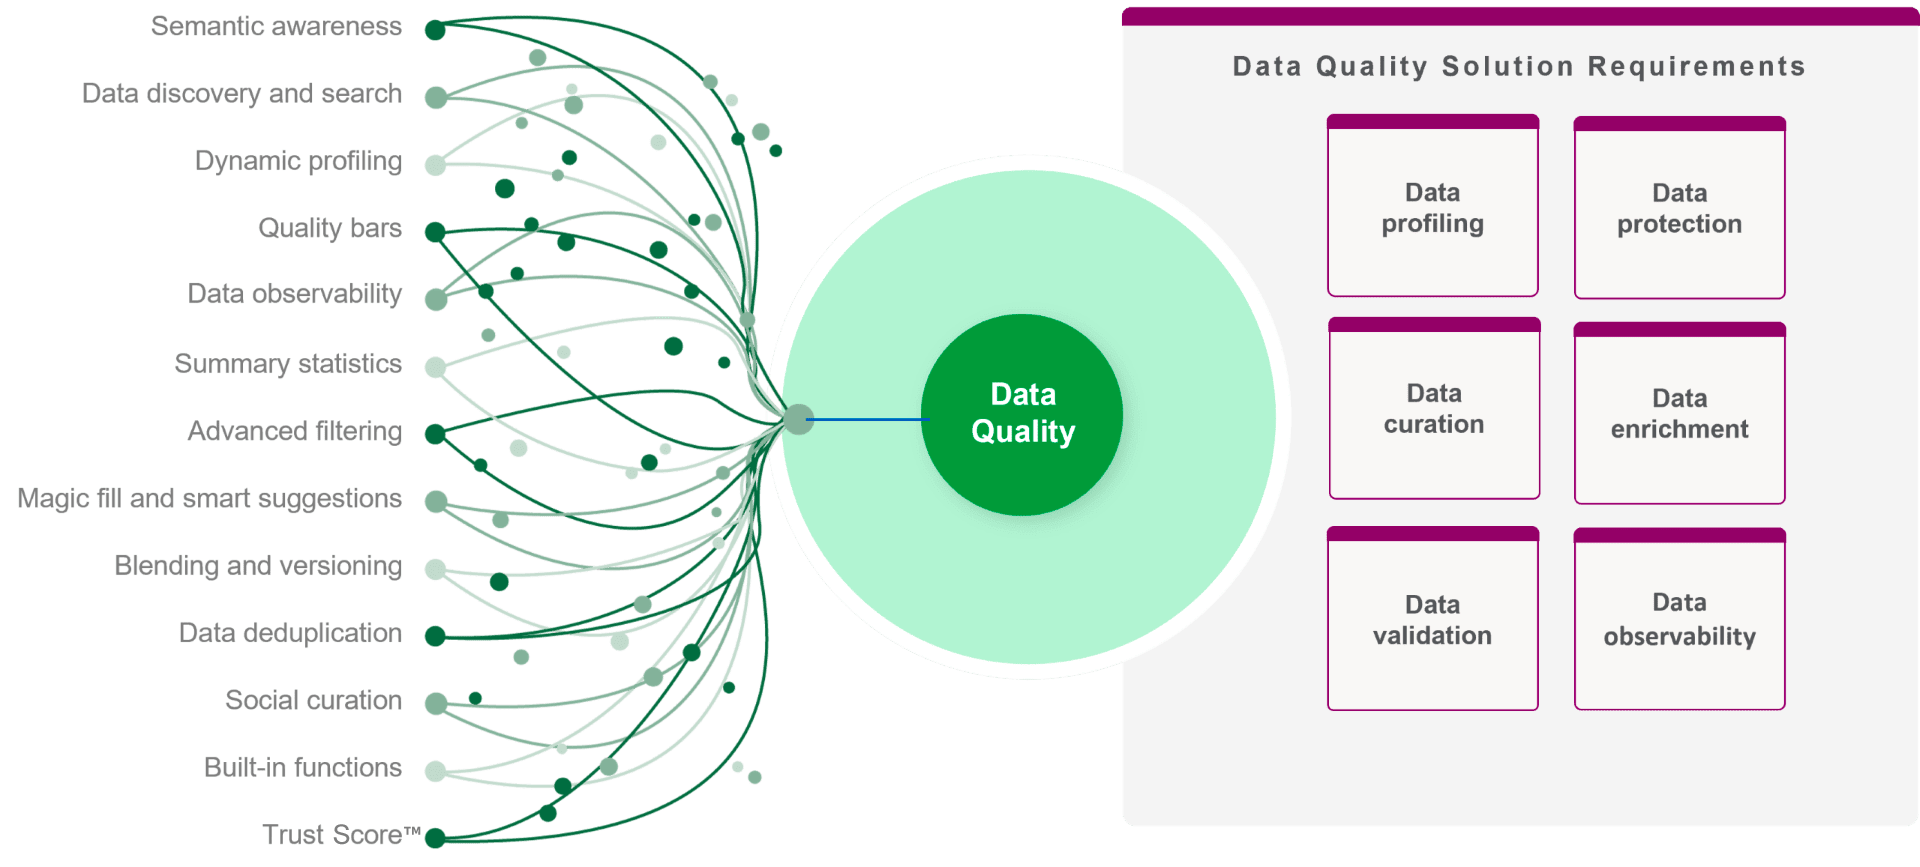 Diagram showing the flow from Data attributes to Data quality to Data quality solution requirements